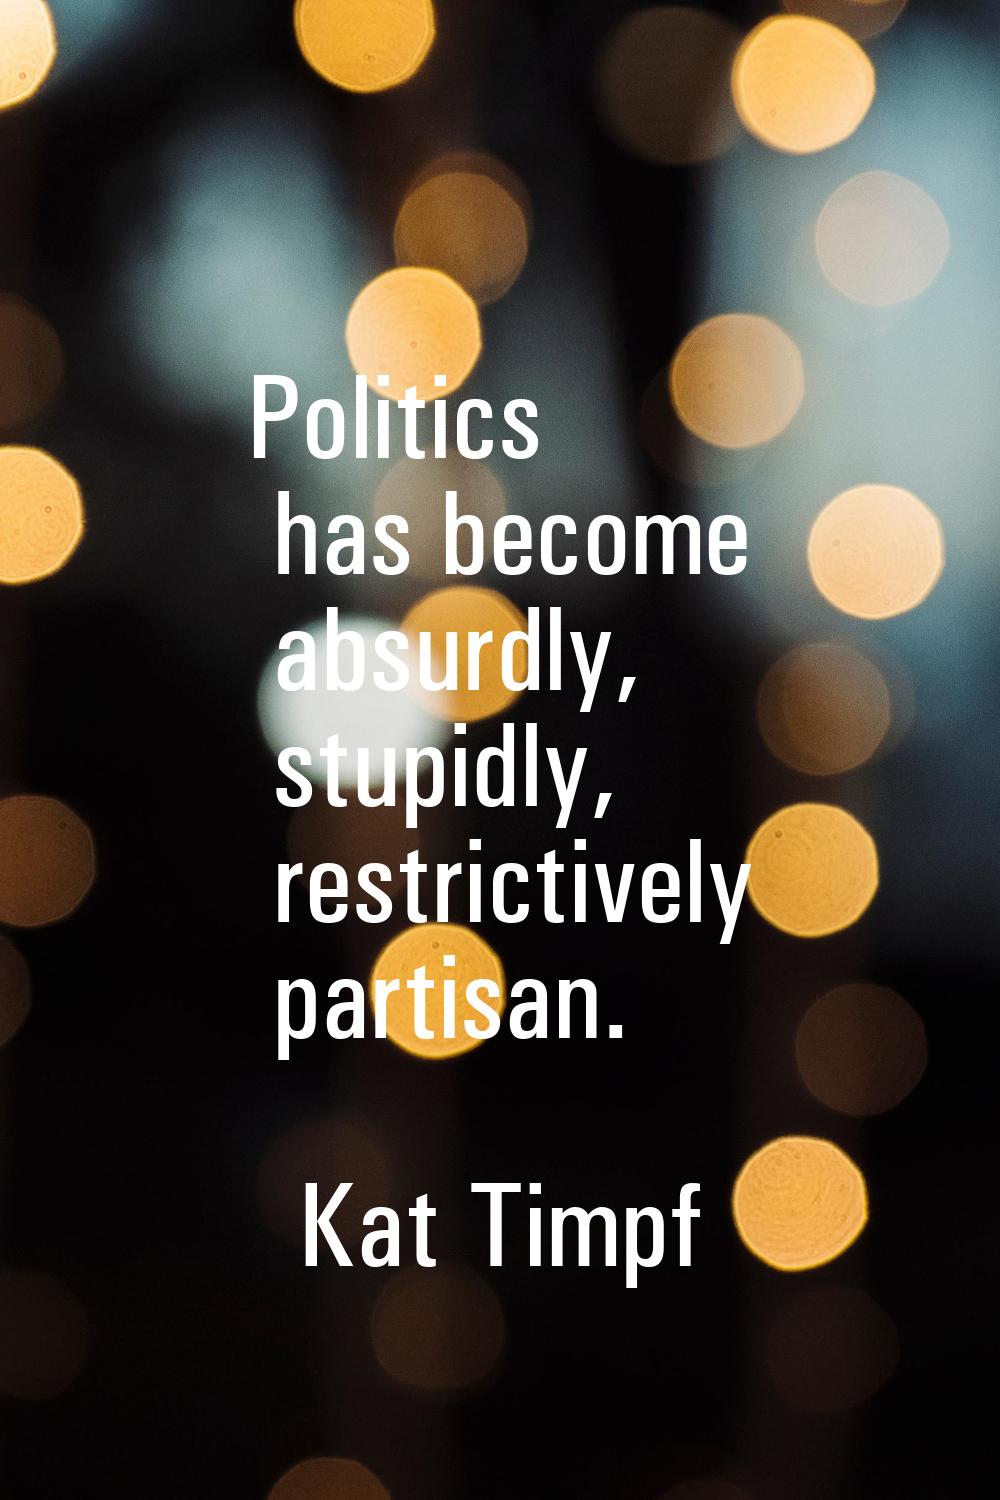 Politics has become absurdly, stupidly, restrictively partisan.